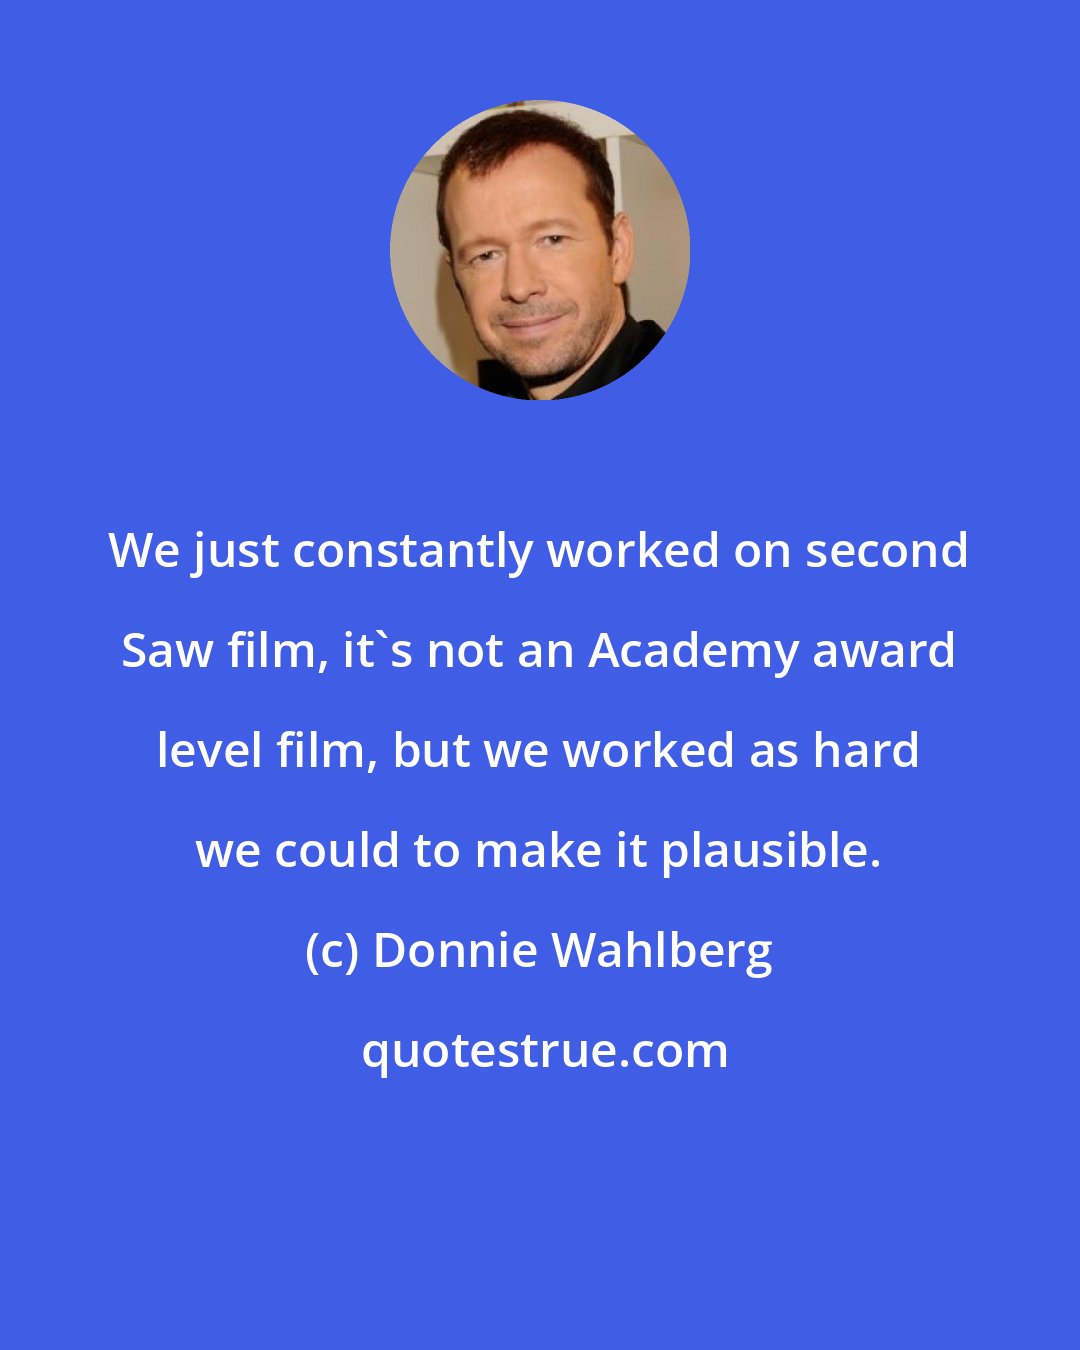 Donnie Wahlberg: We just constantly worked on second Saw film, it's not an Academy award level film, but we worked as hard we could to make it plausible.